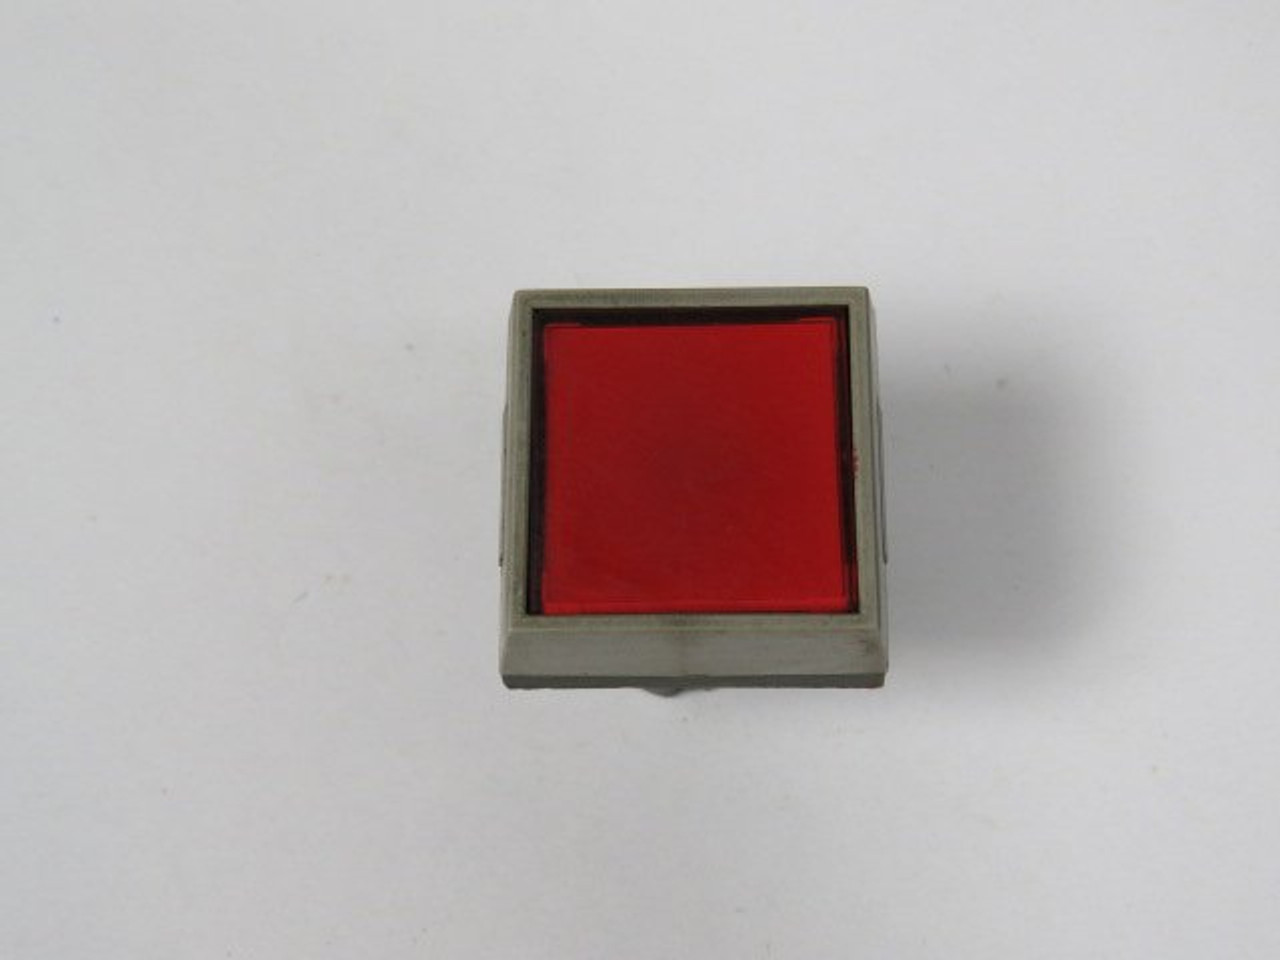 APT LA39-B2-DF/R Red Square Push Button Operator Only USED